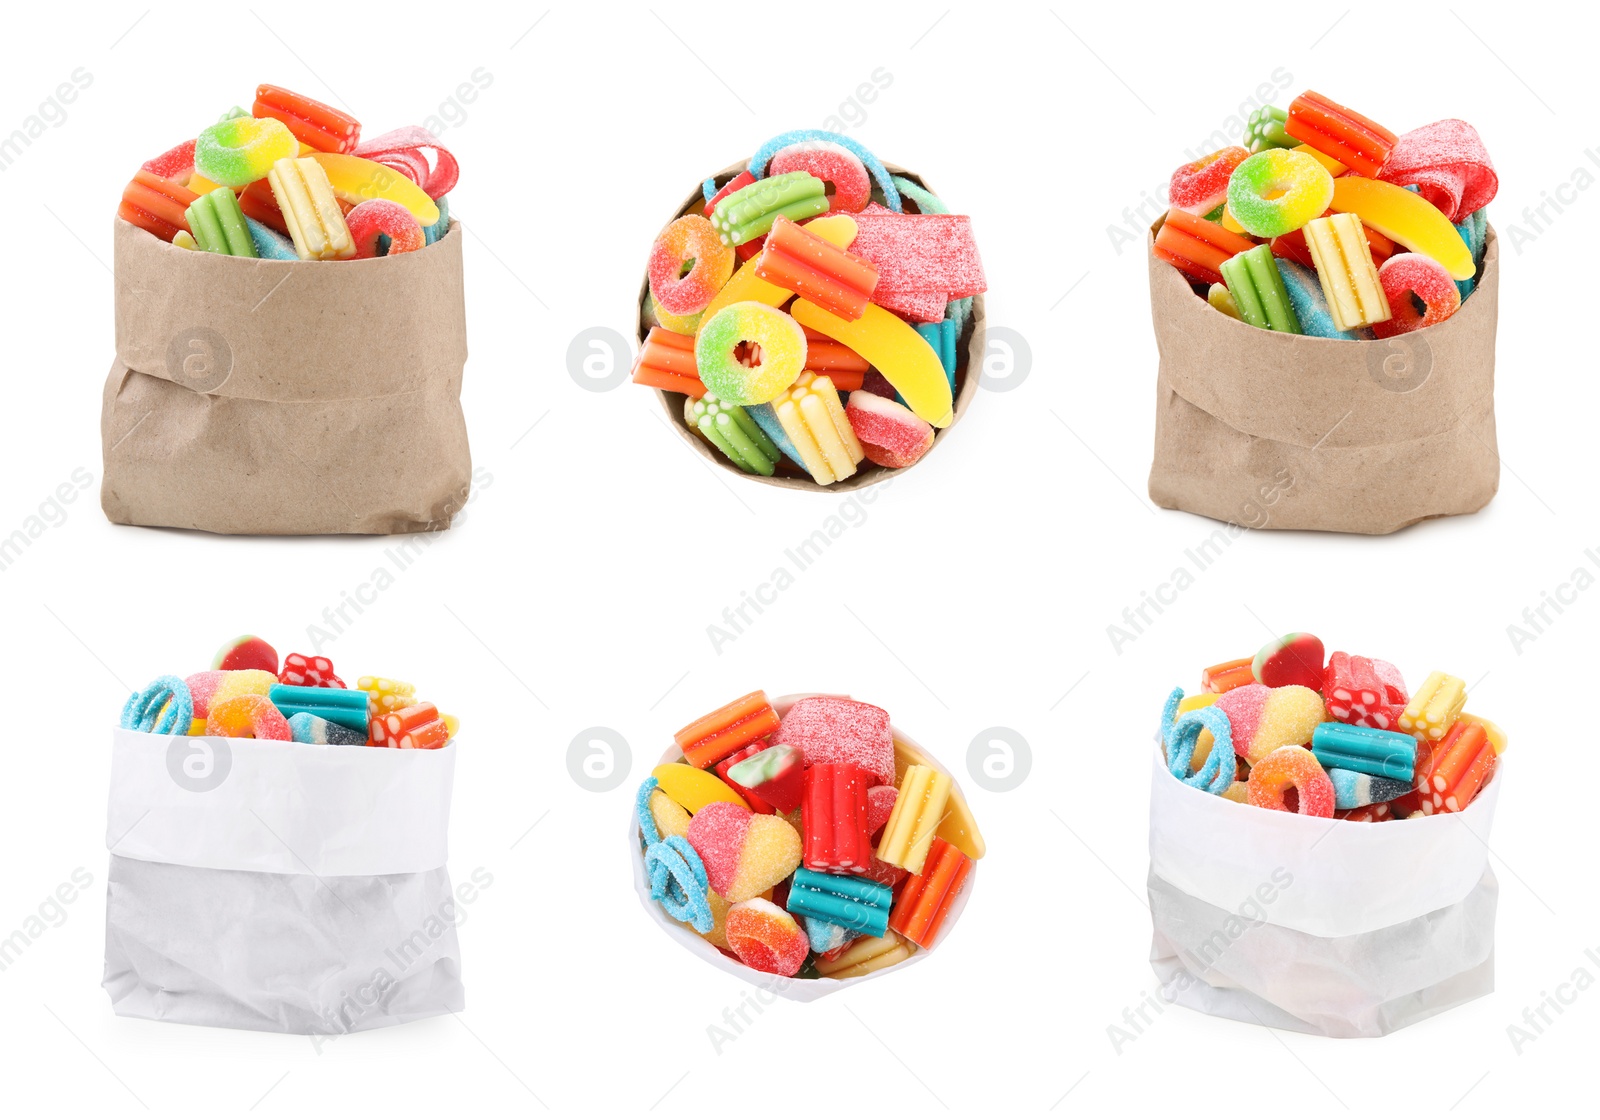 Image of Collage with paper bags of tasty jelly candies on white background, different sides